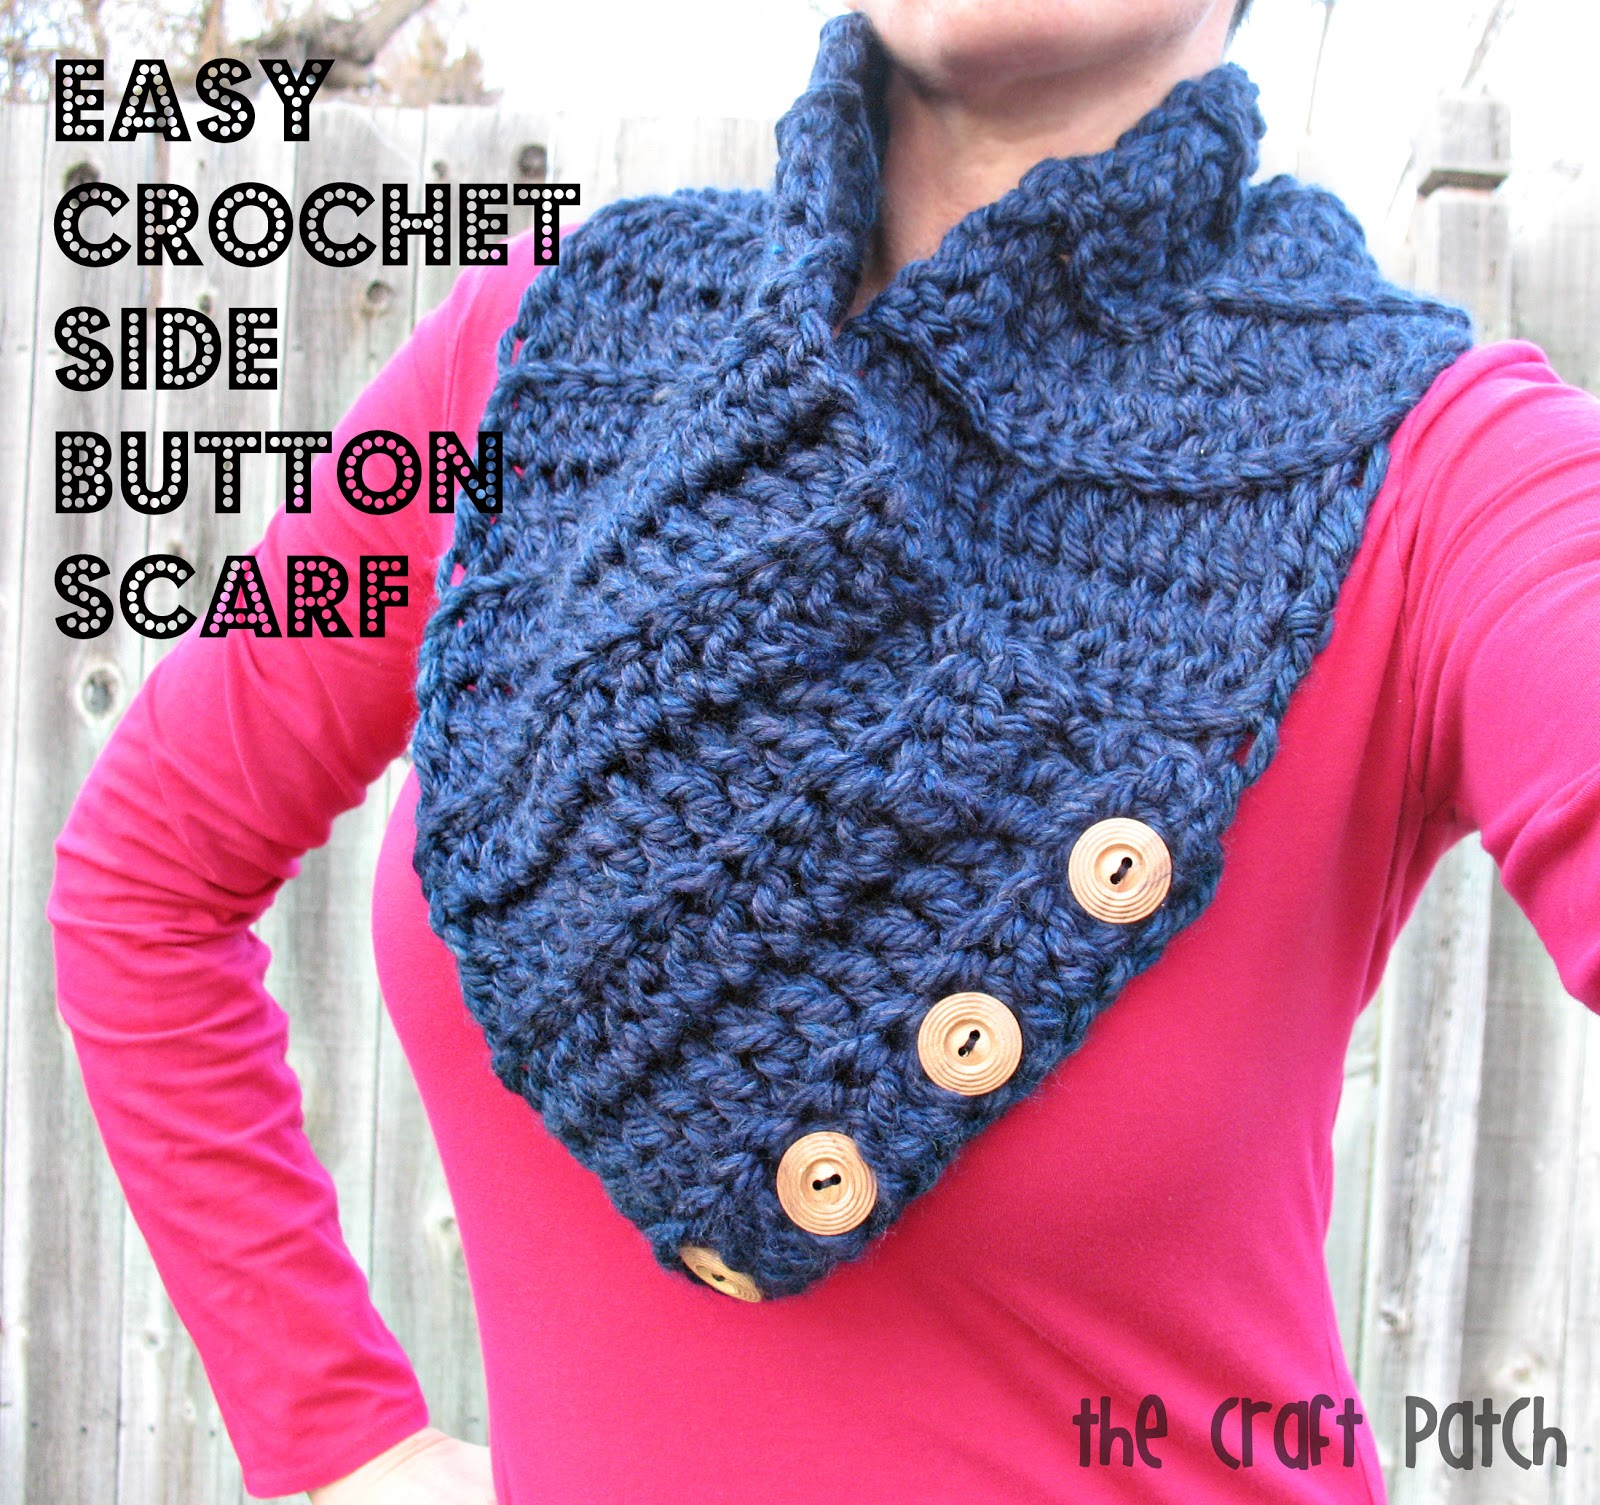 Crocheted Scarf Patterns Easy Crochet Side Button Scarf Thecraftpatchblog